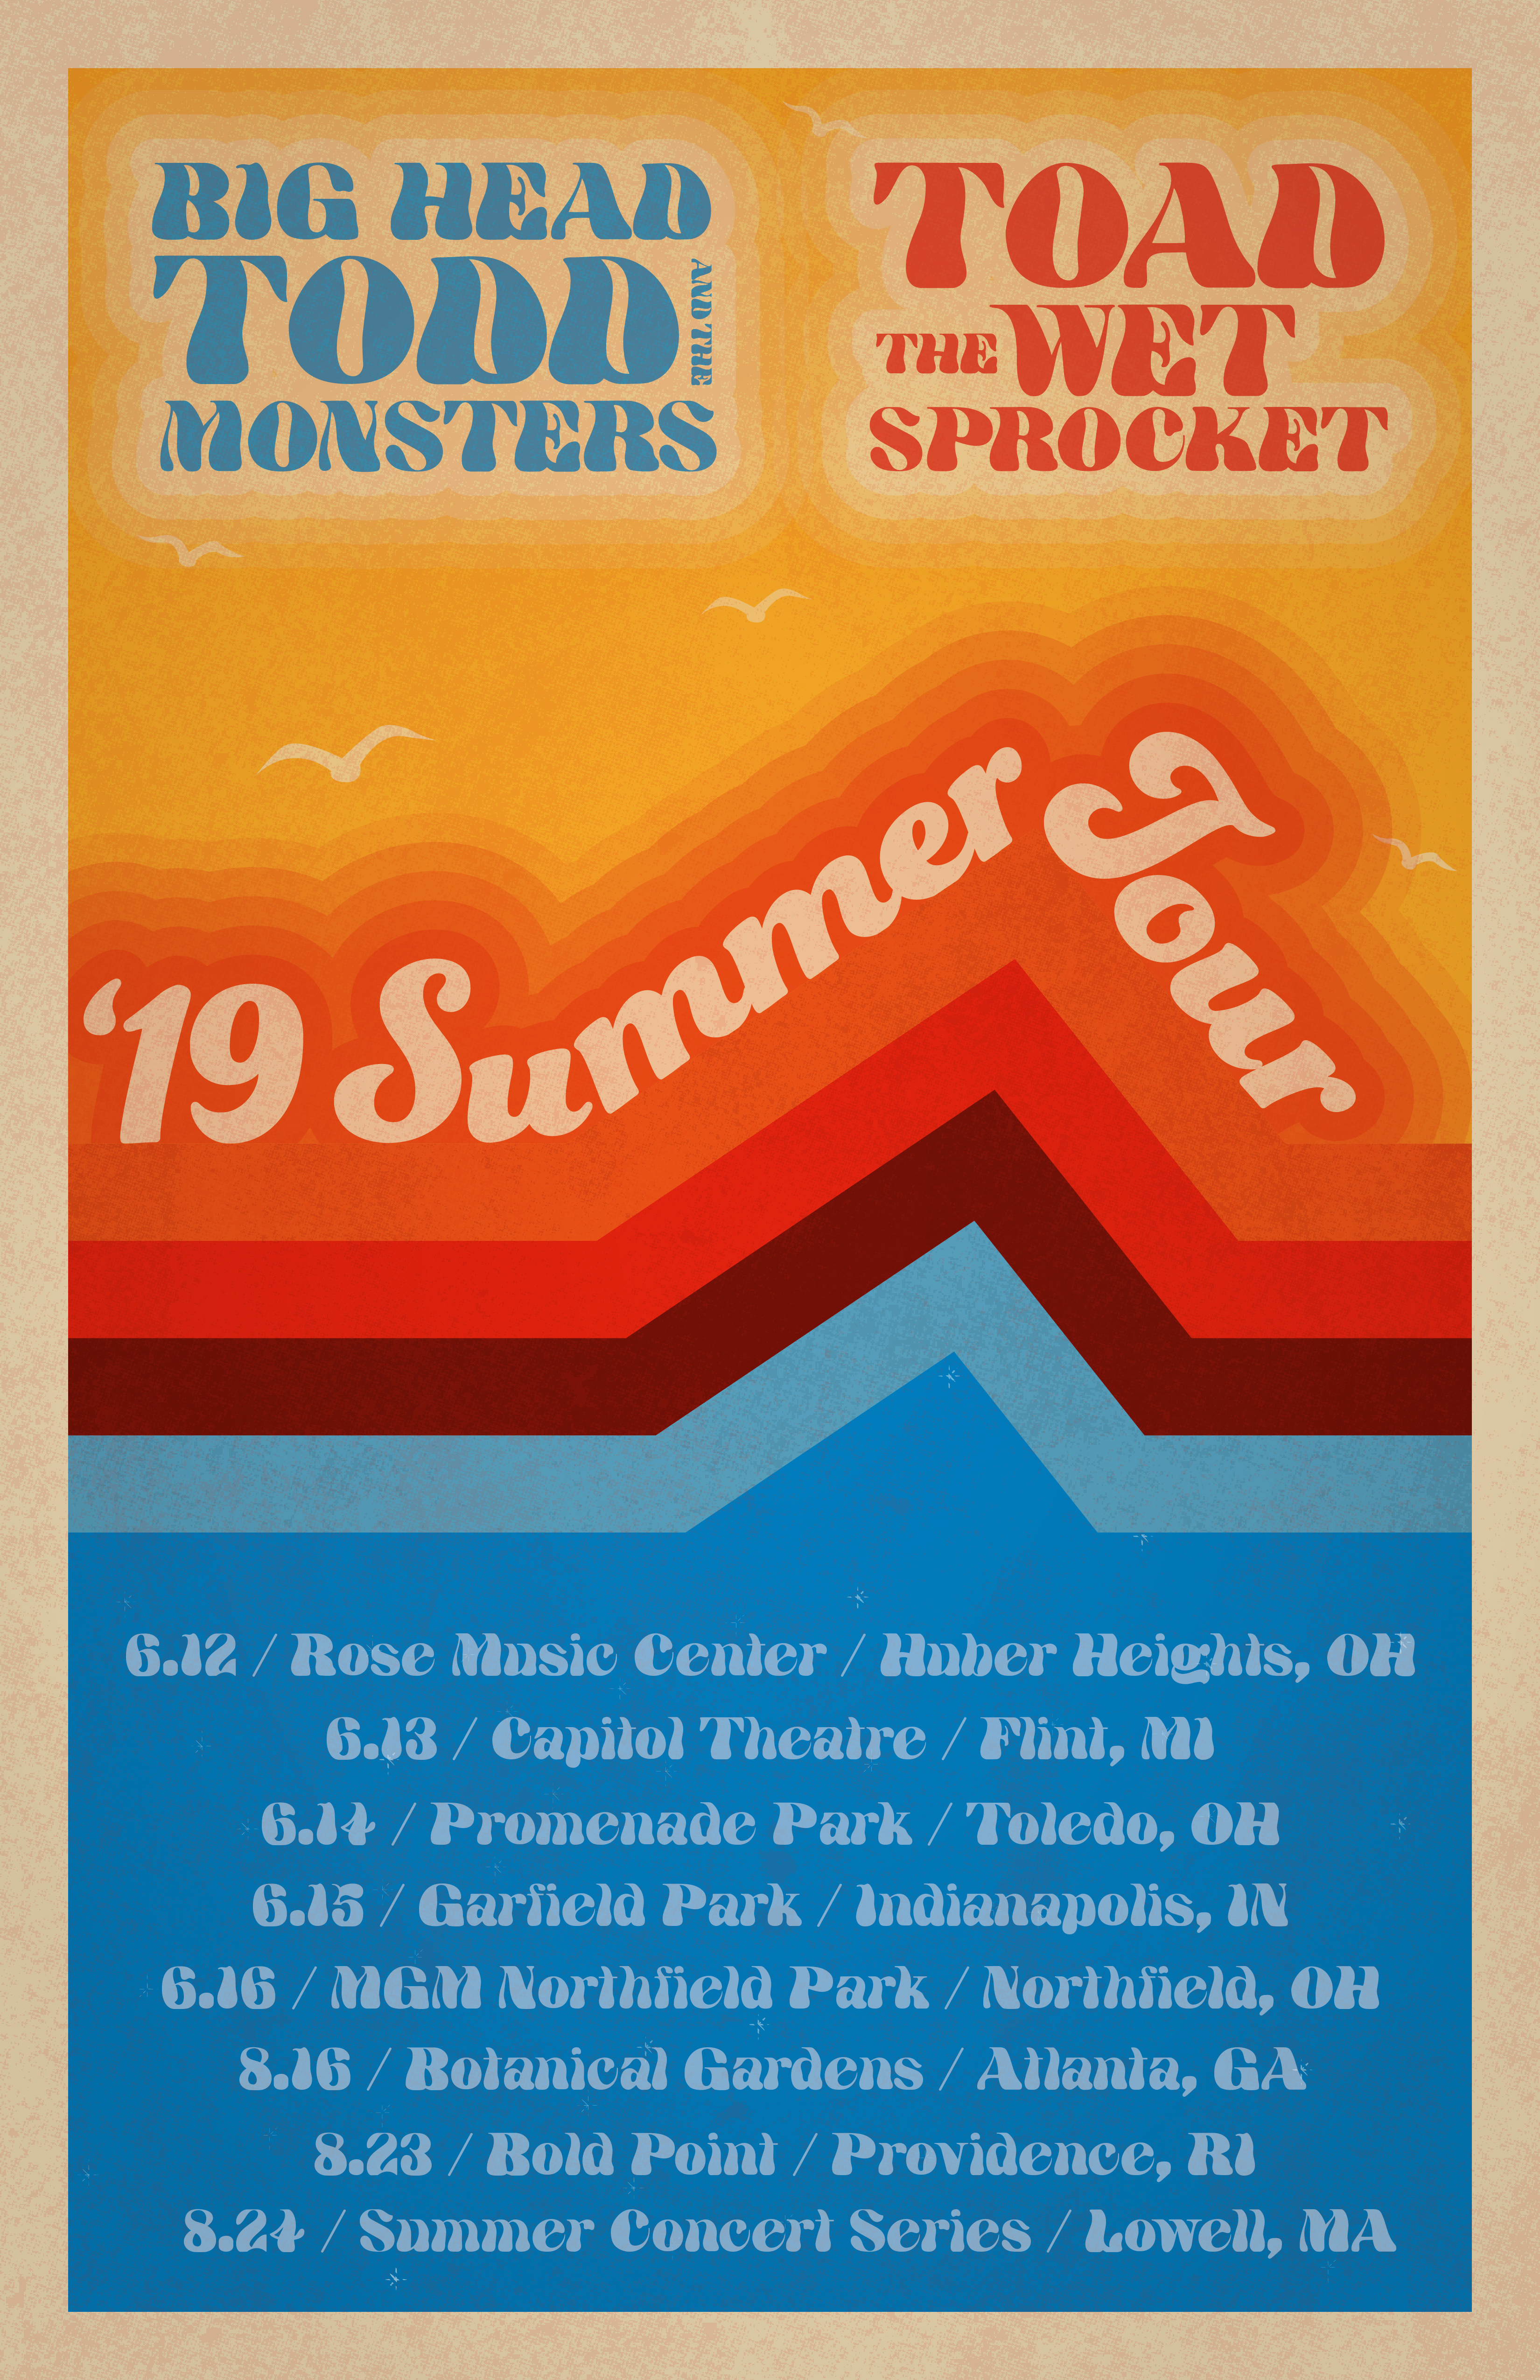 Summer Tour Announced: BHTM + Toad the Wet Sprocket